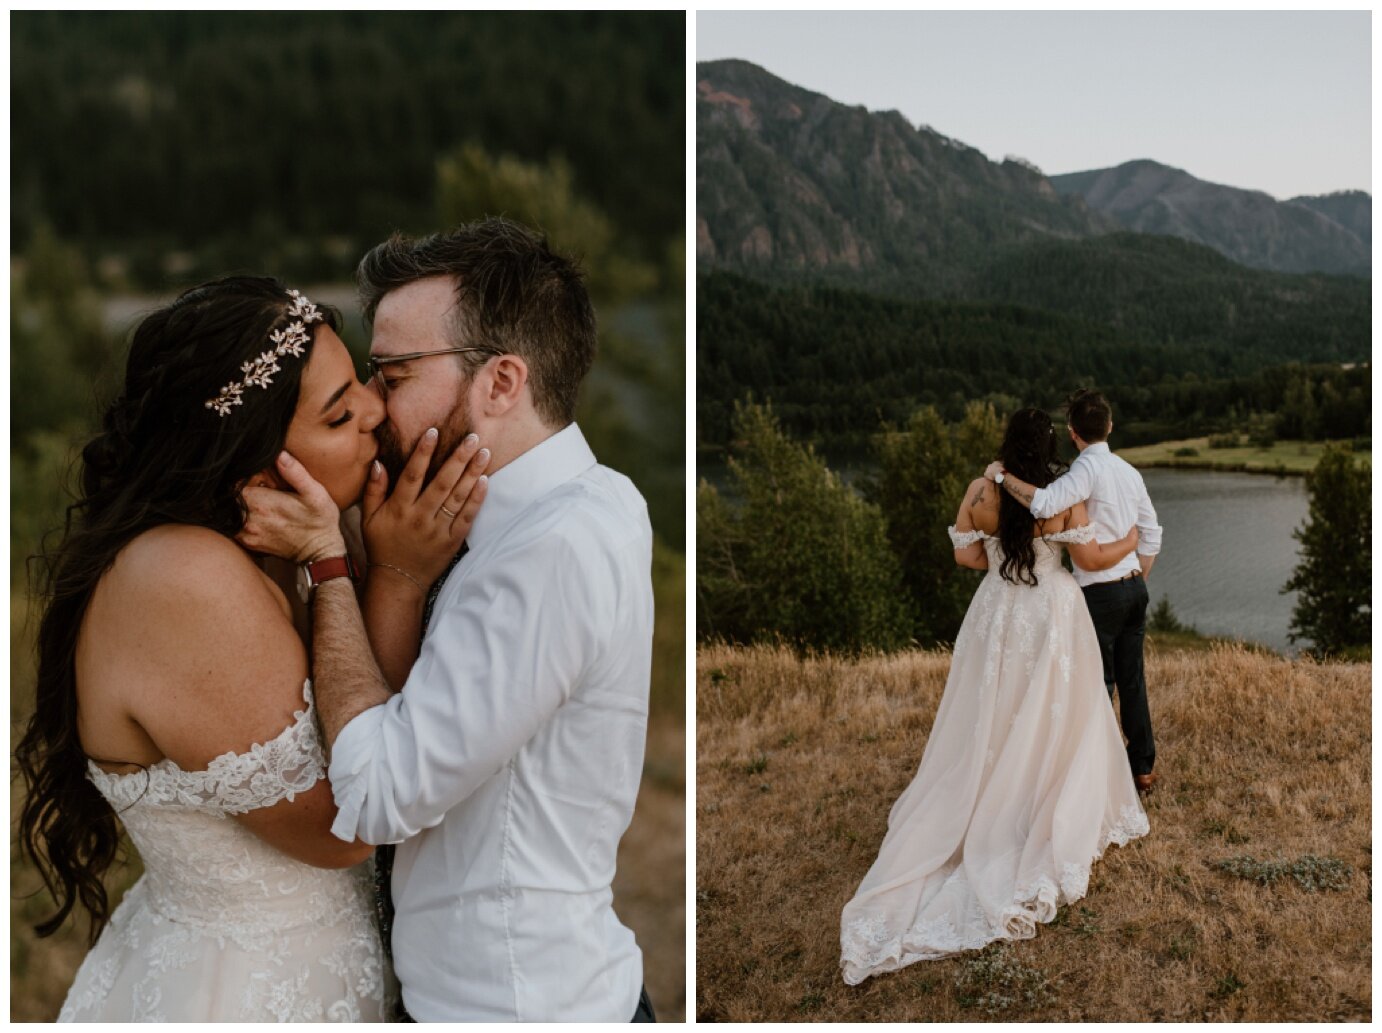 Elopement at Government Cove Peninsula - Madeline Rose Photography - PNW Elopement Photographer_0030.jpg